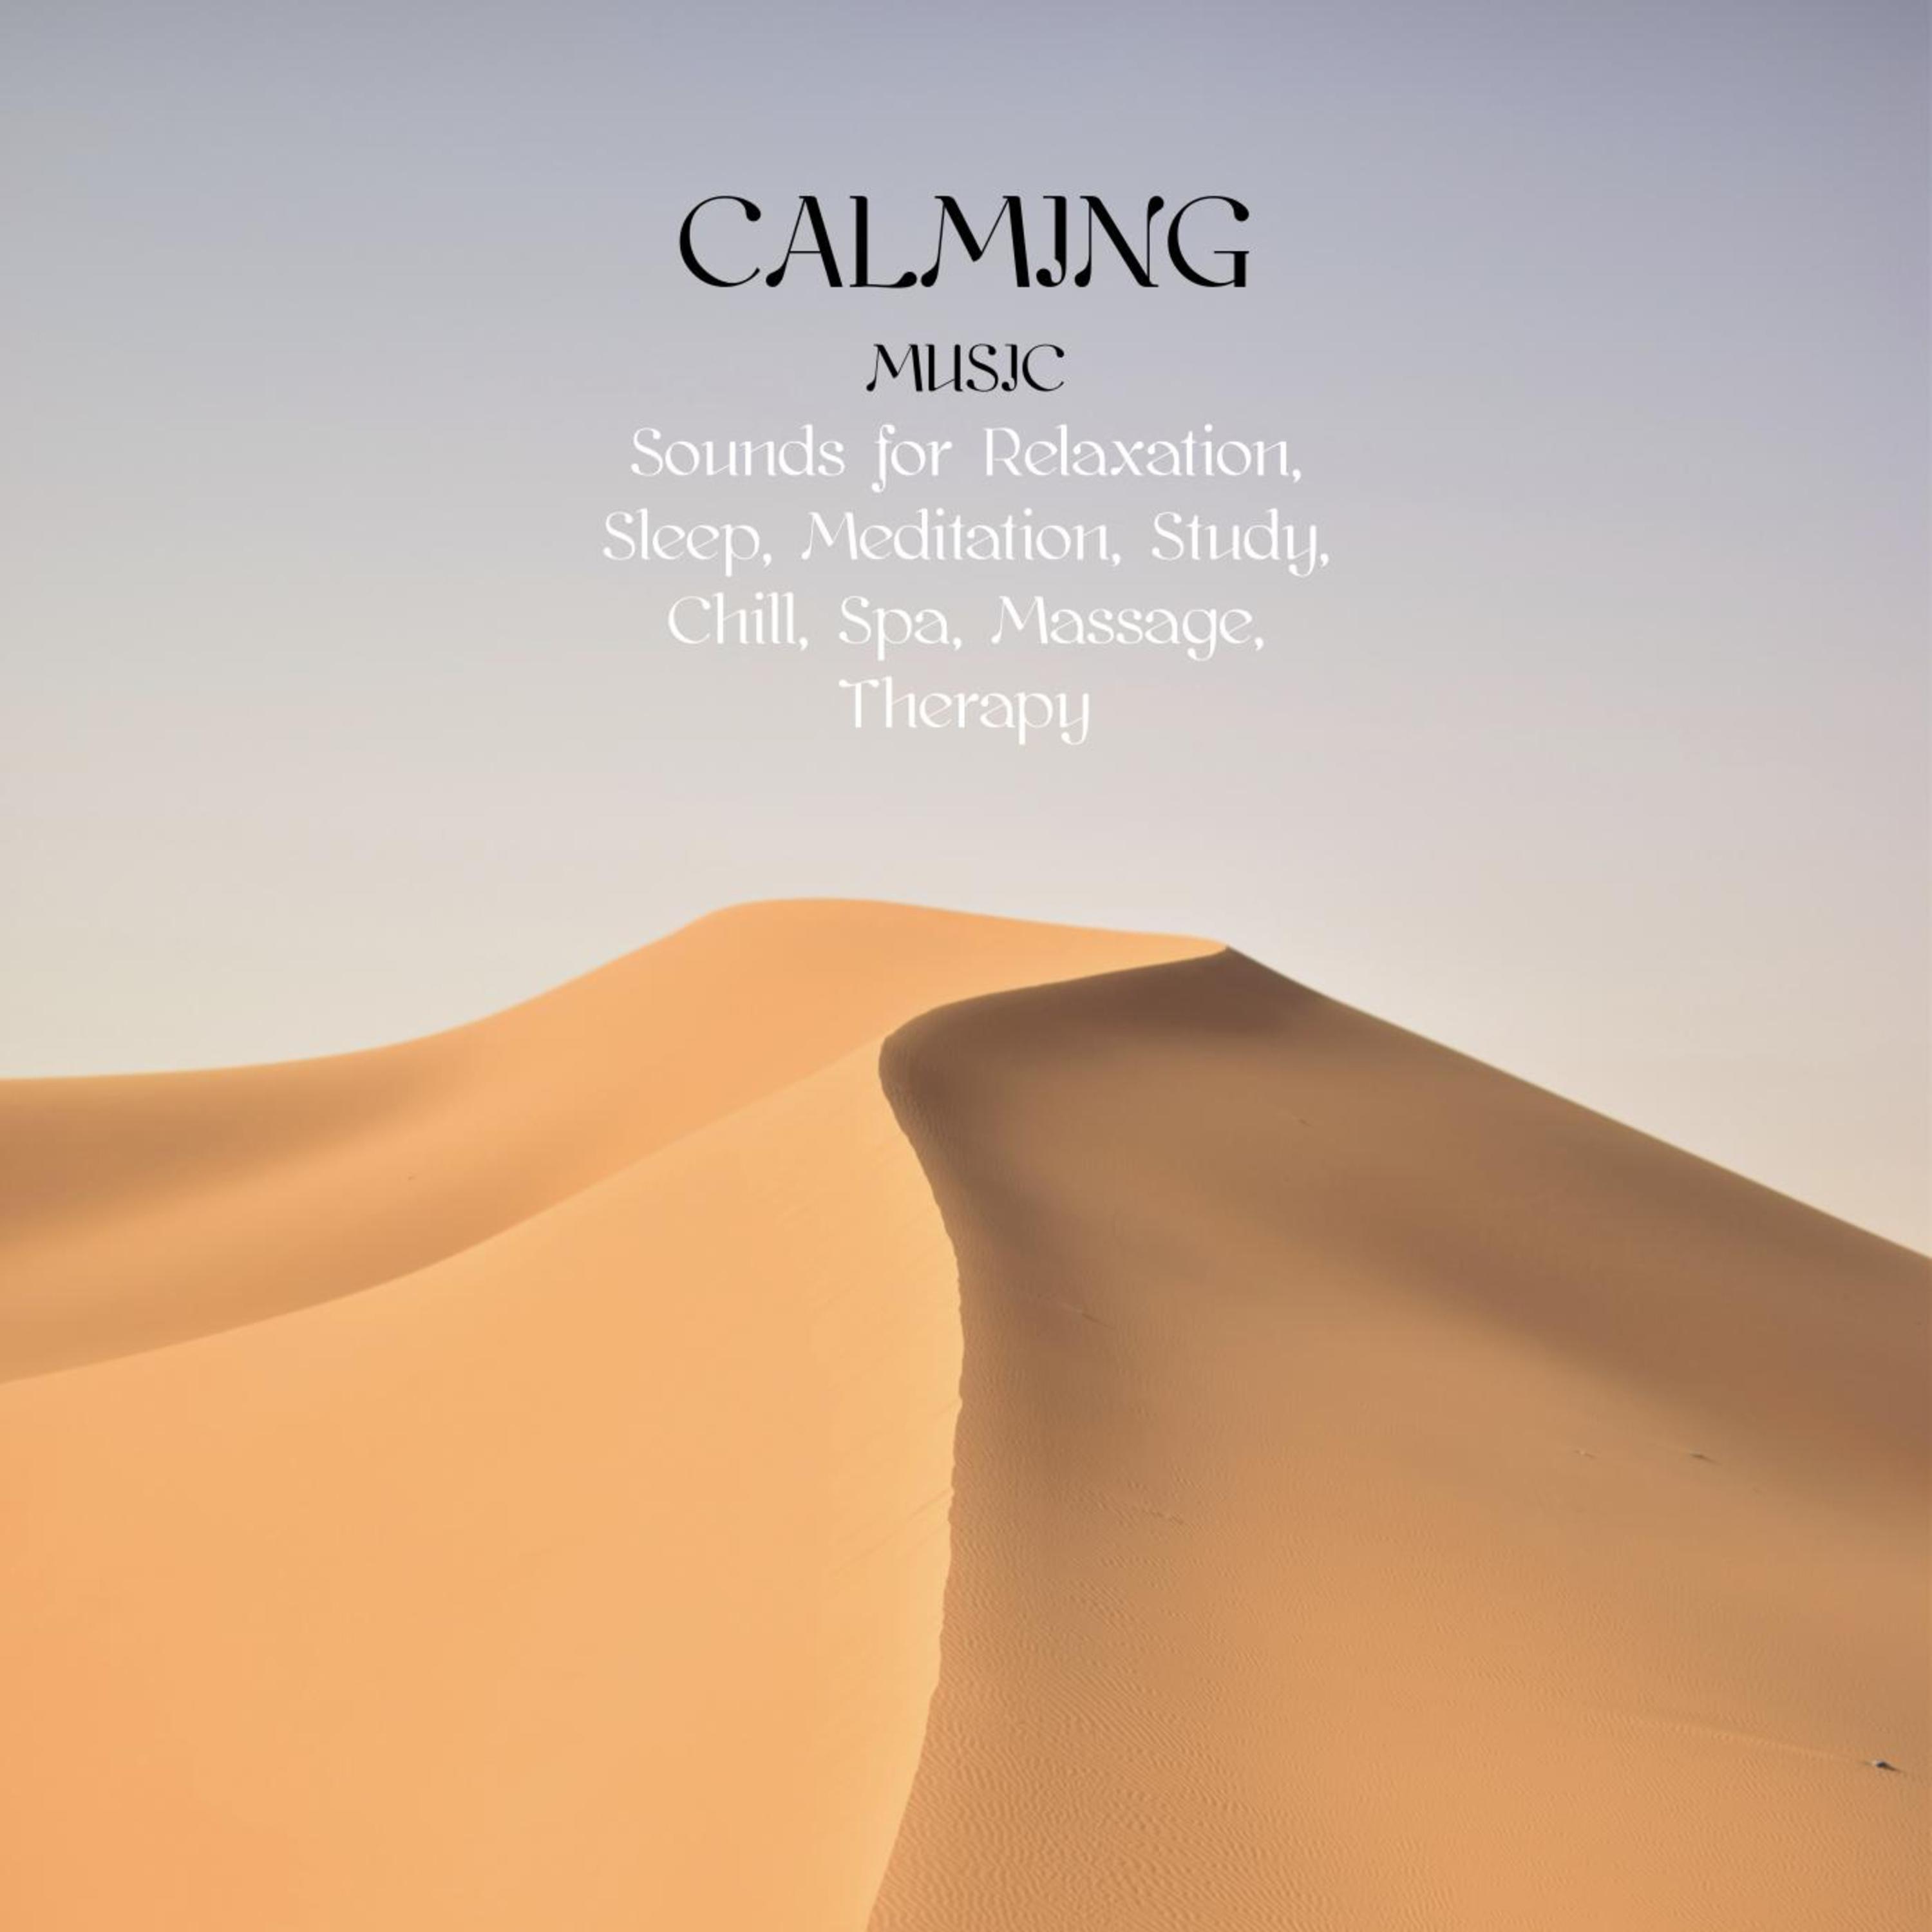 Calming Music: Sounds for Relaxation, Sleep, Meditation, Study, Chill, Spa, Massage, Therapy